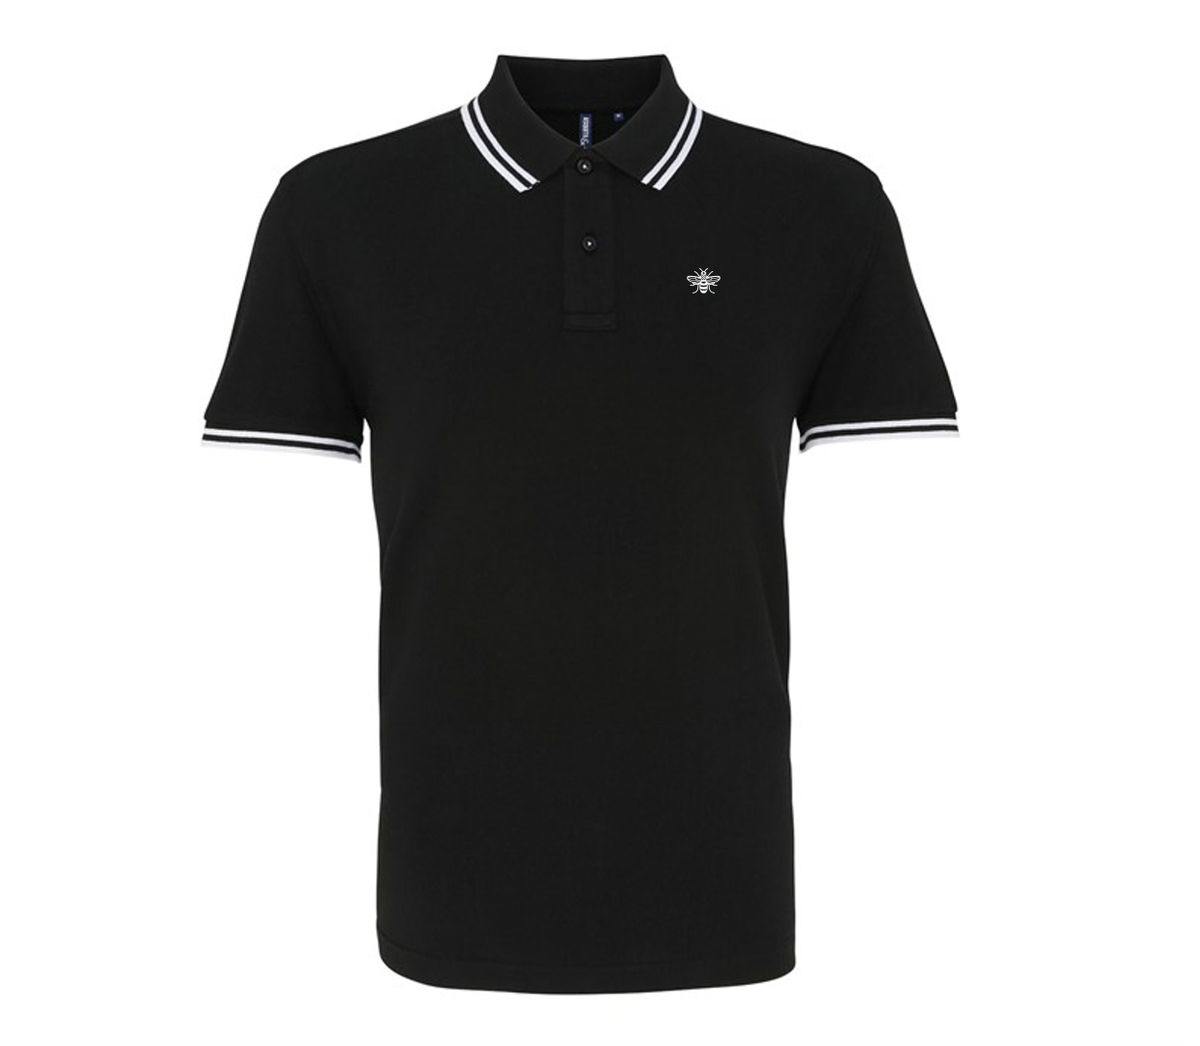 BeeManc Embroidered Bee Tipped Polo - Black/White